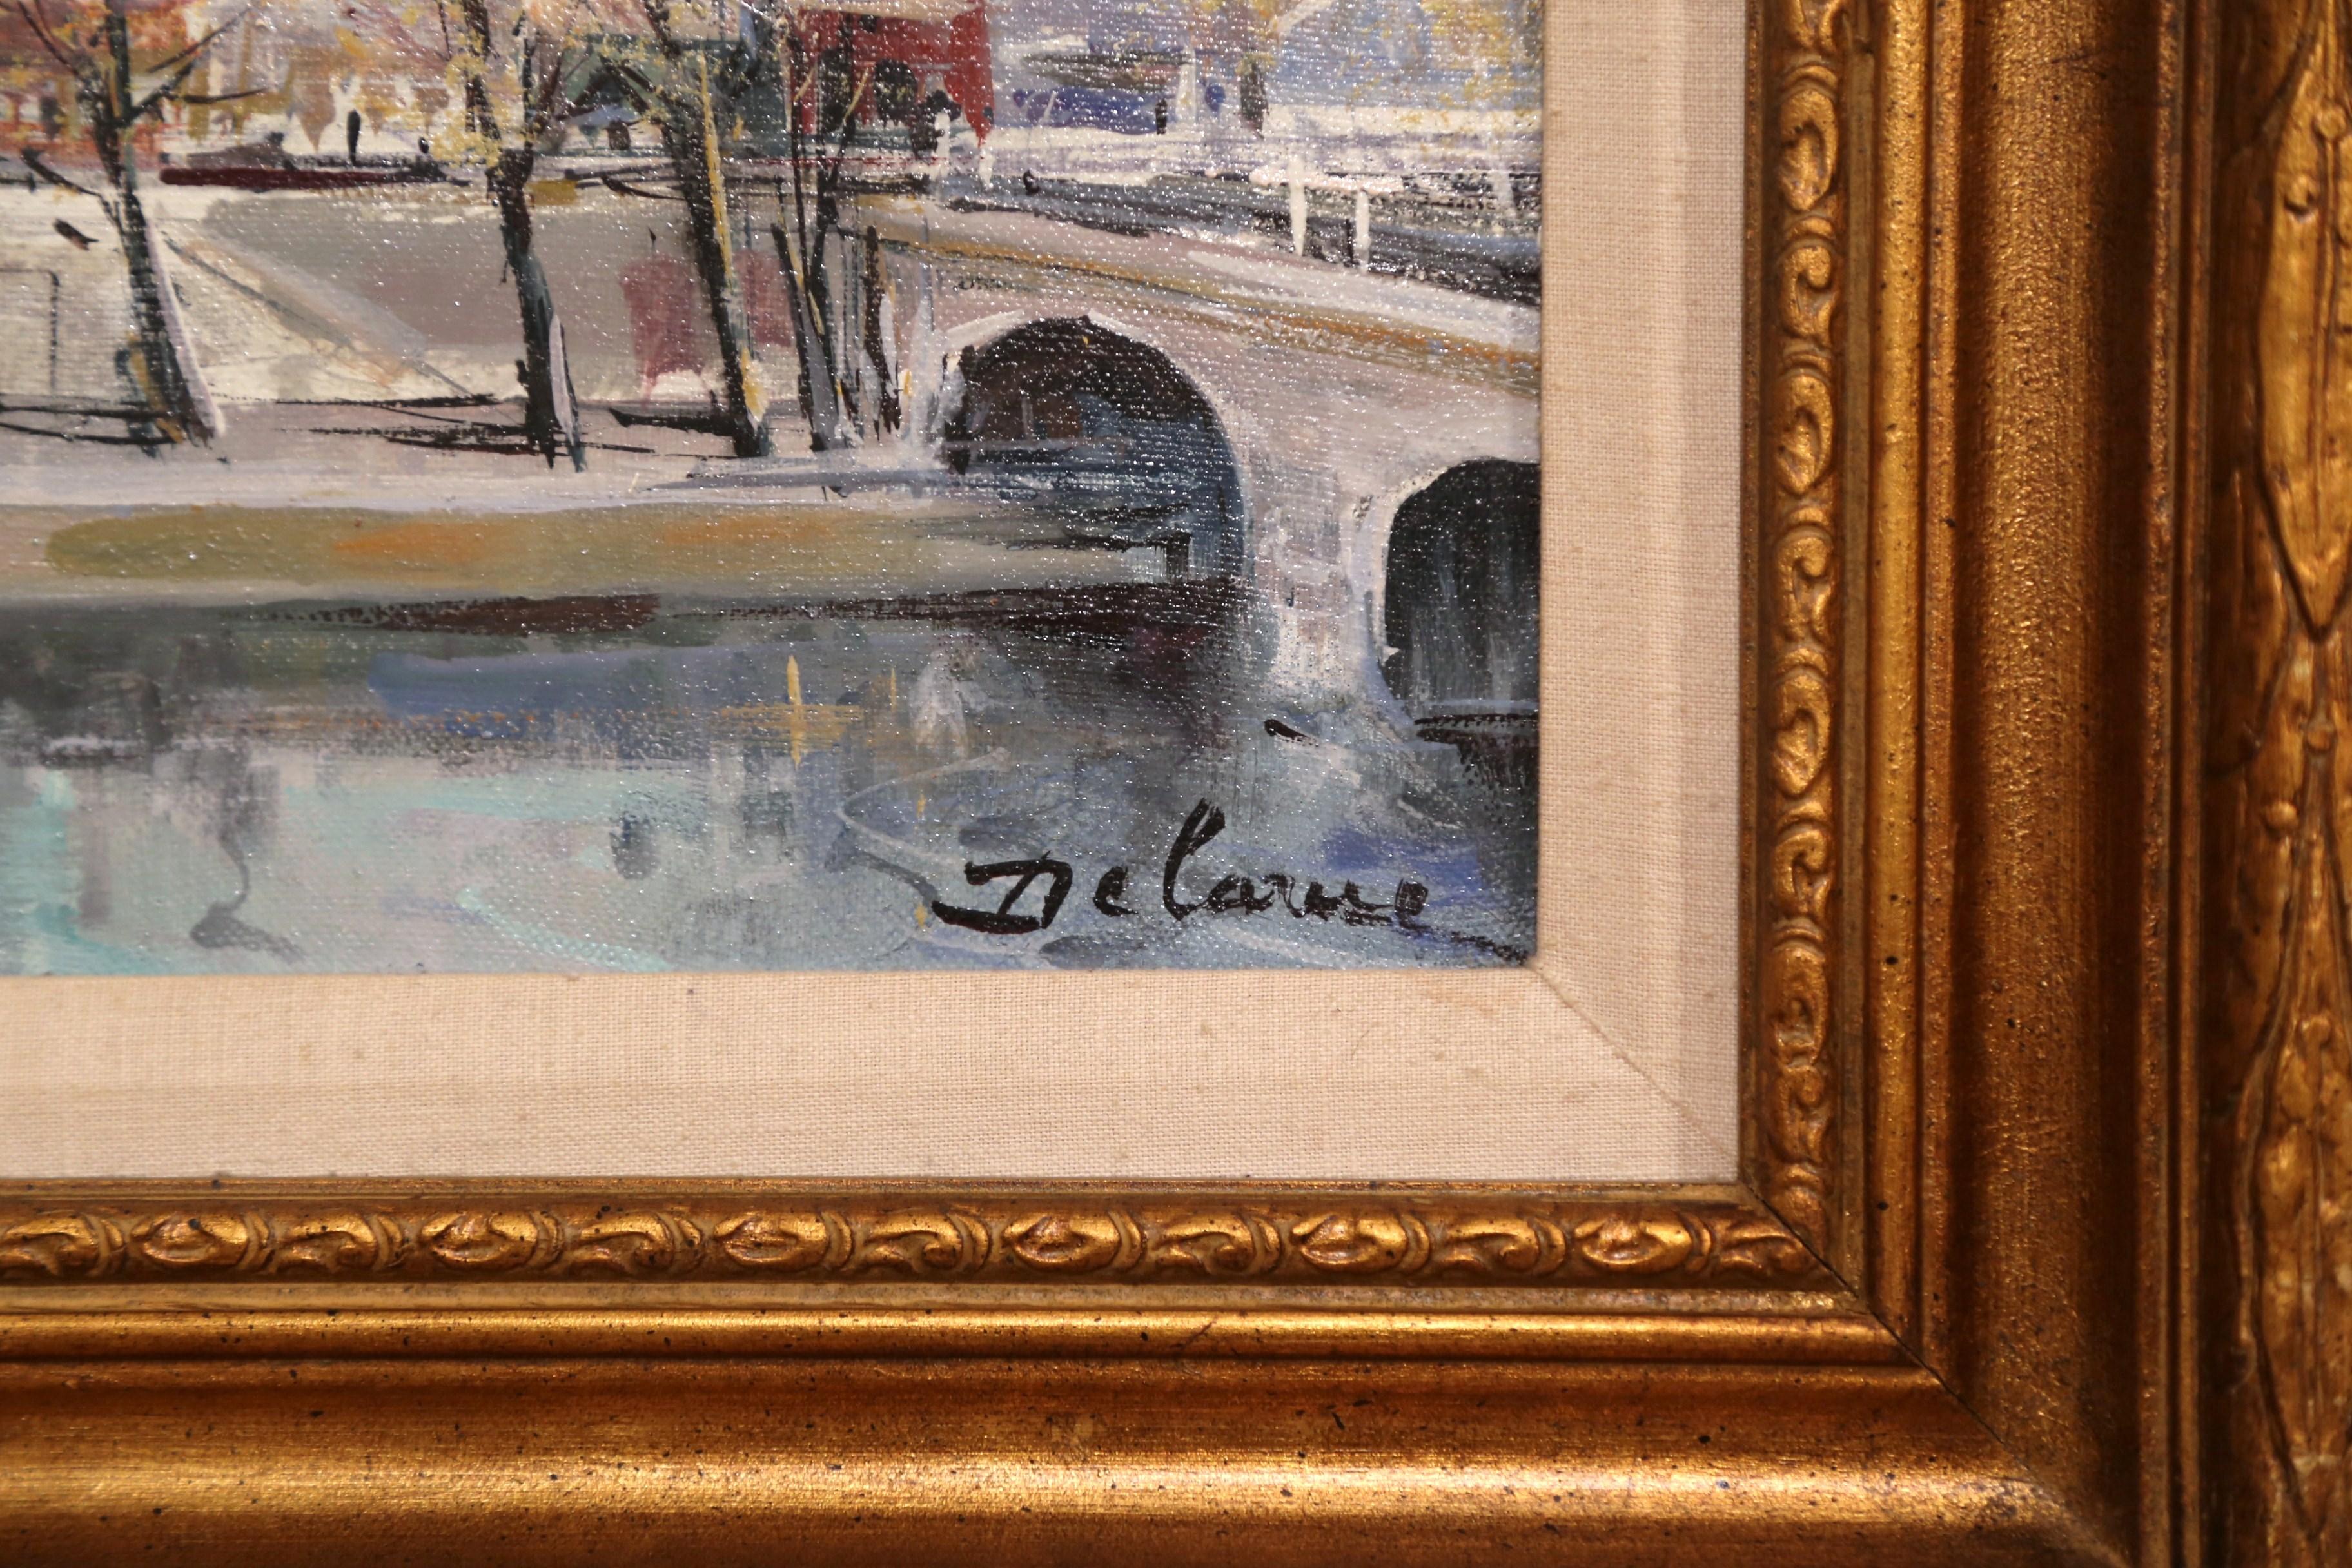 Keep a view of Paris in your home with this oil on canvas painting by French painter, Lucien Delarue. Set inside a carved gilt frame, this detailed, architectural painting is signed in lower right corner by the artist. The art work depicts a famous